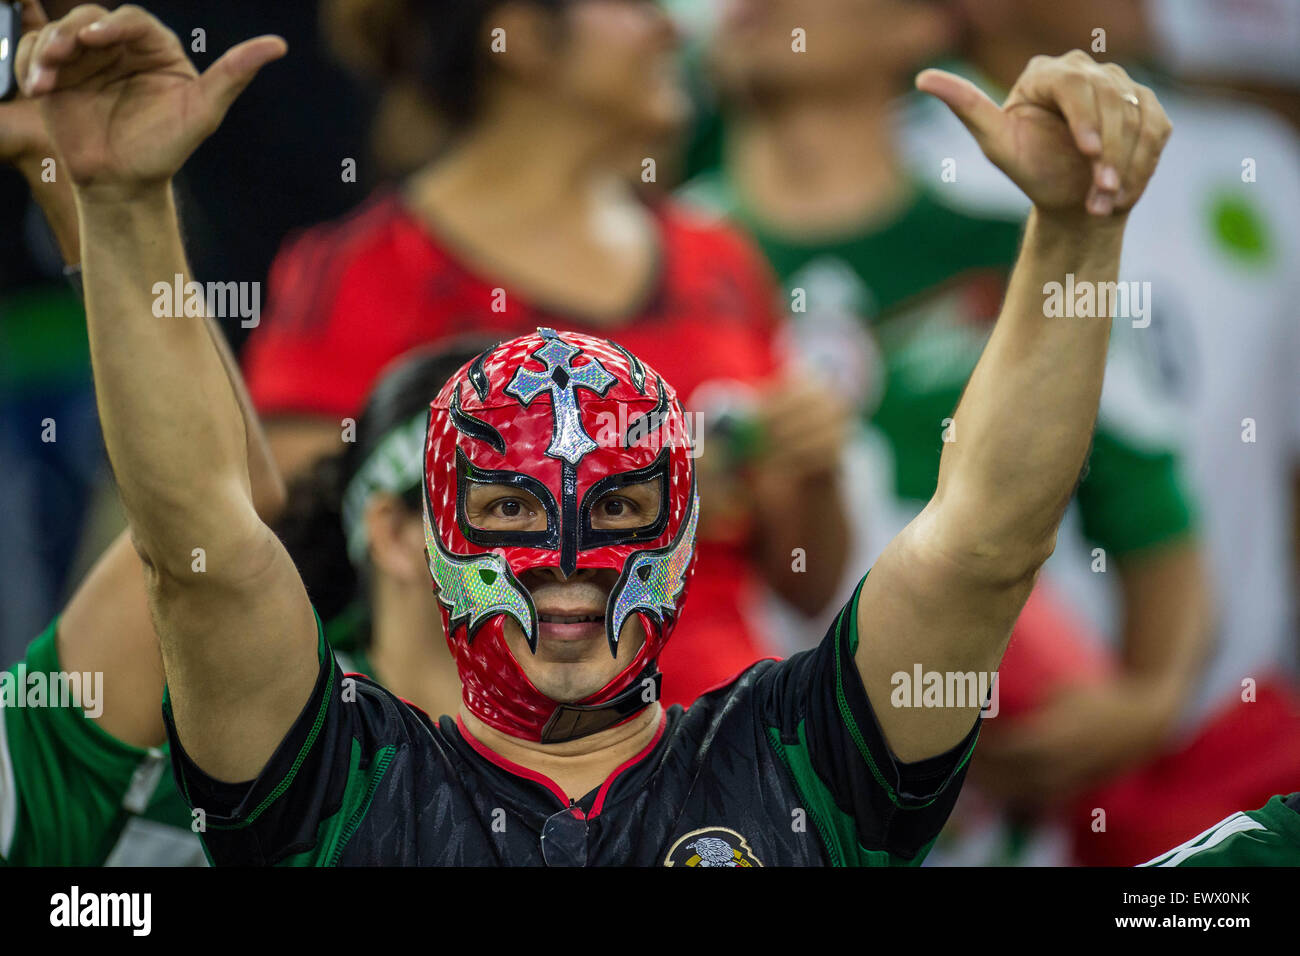 Houston, TX, USA. 1st July, 2015. Mexico fan prior to an international soccer match between Honduras and Mexico at NRG Stadium in Houston, TX. Trask Smith/CSM/Alamy Live News Stock Photo